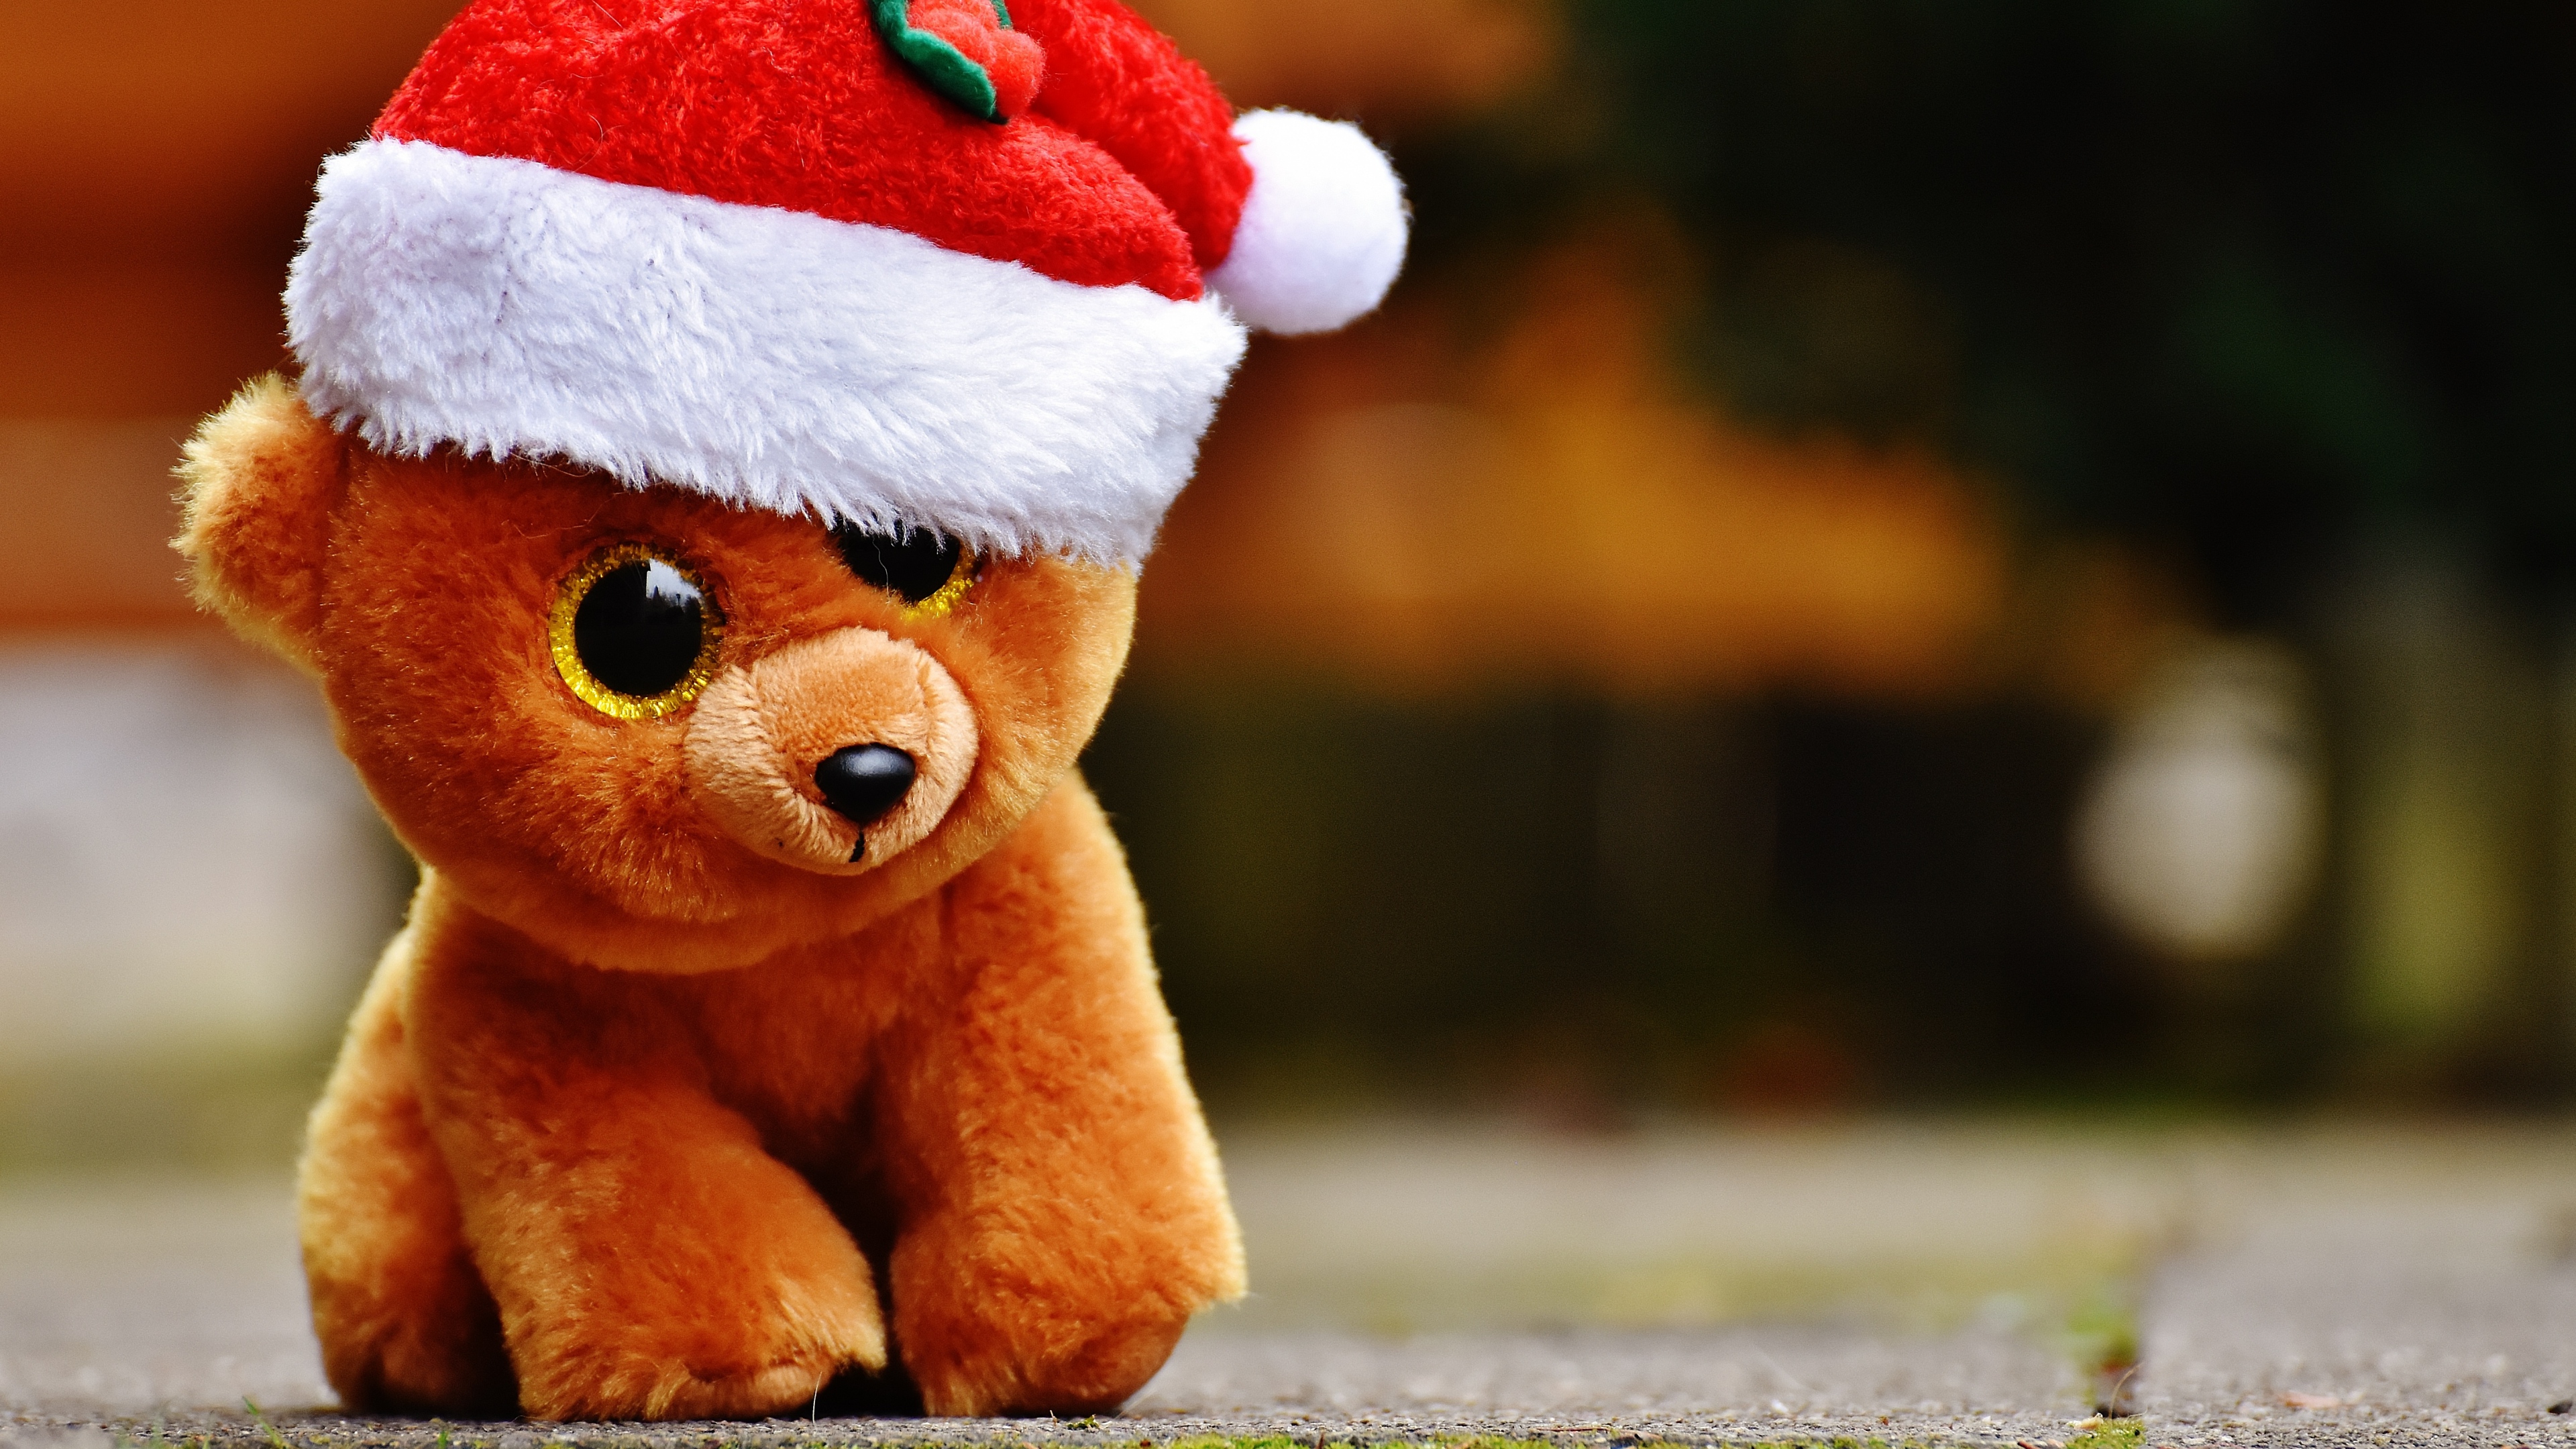 4K Teddy Bear Toy Wallpapers High Quality | Download Free